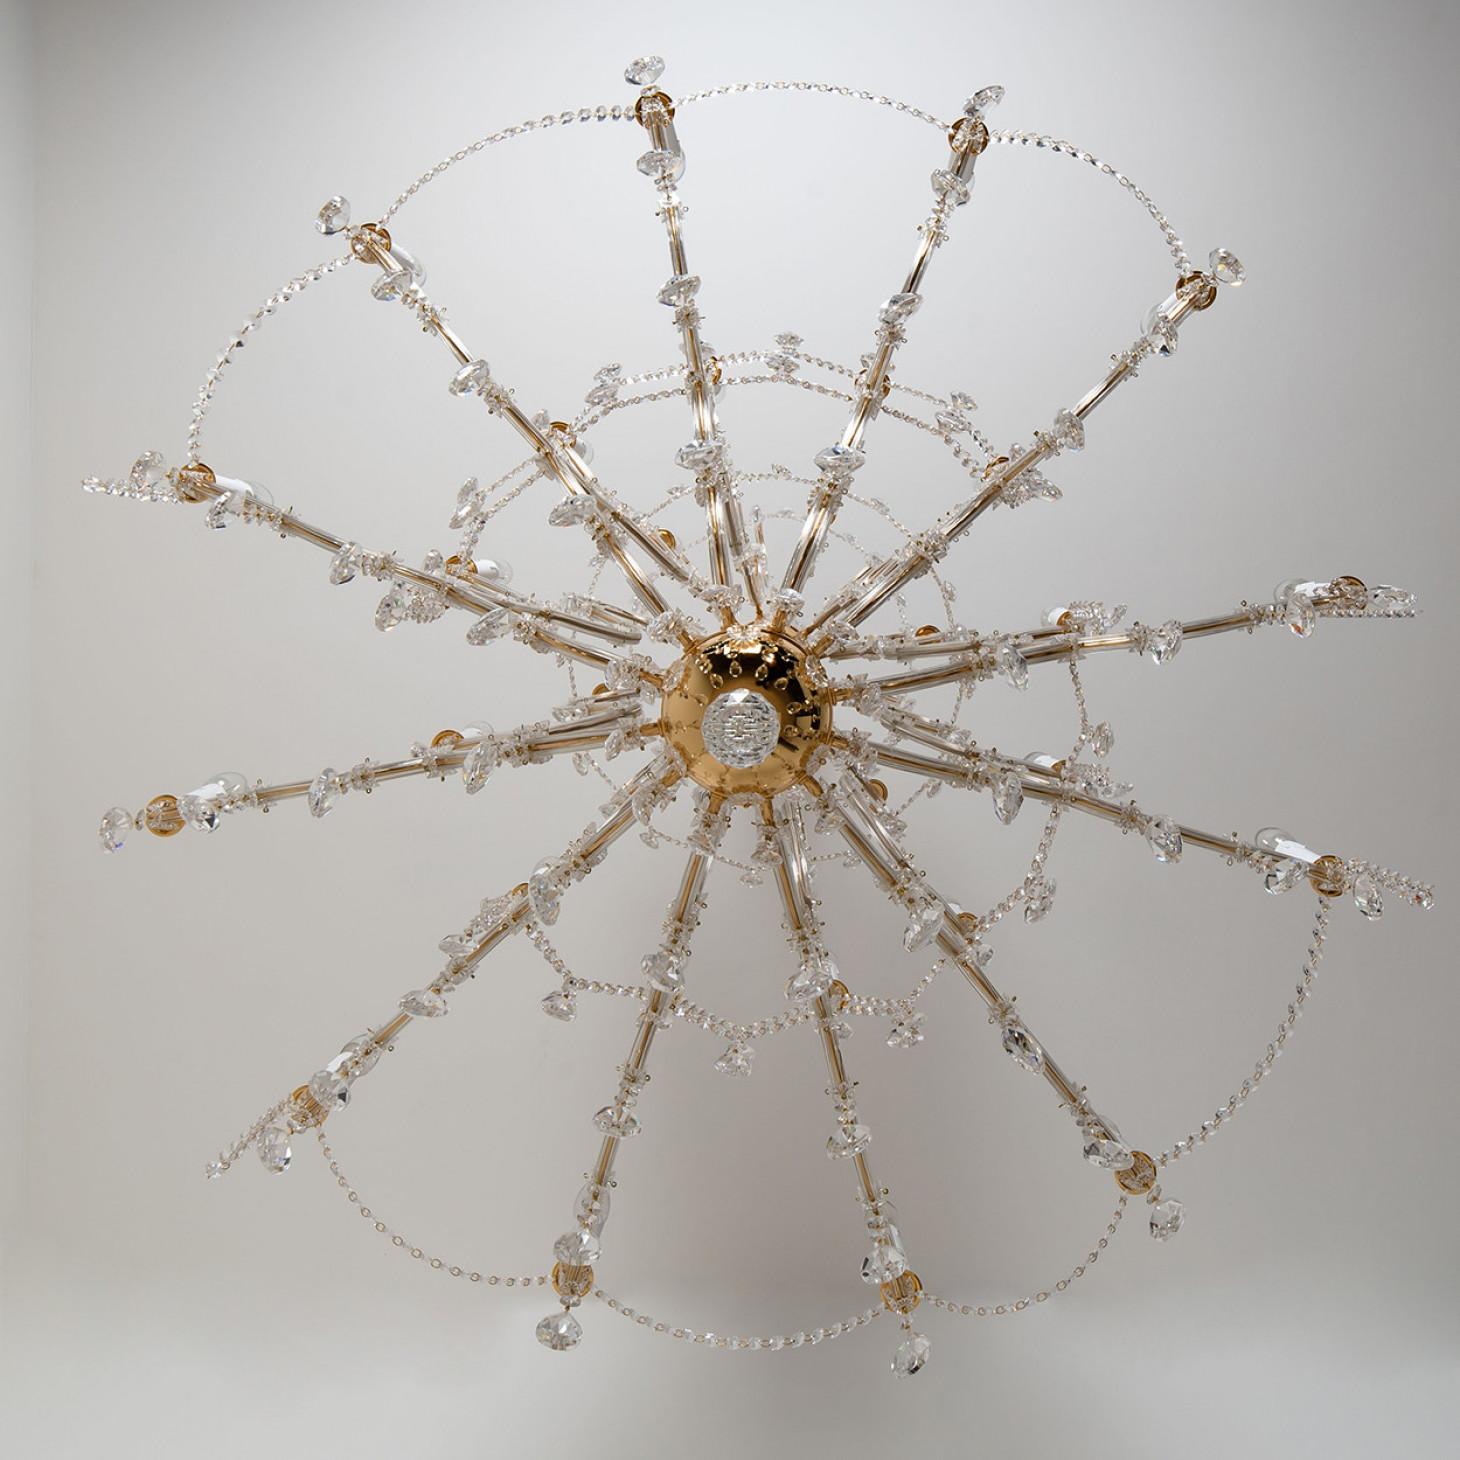 Other High-End XL Maria Theresa Gold Plated Swarovski Chandelier For Sale